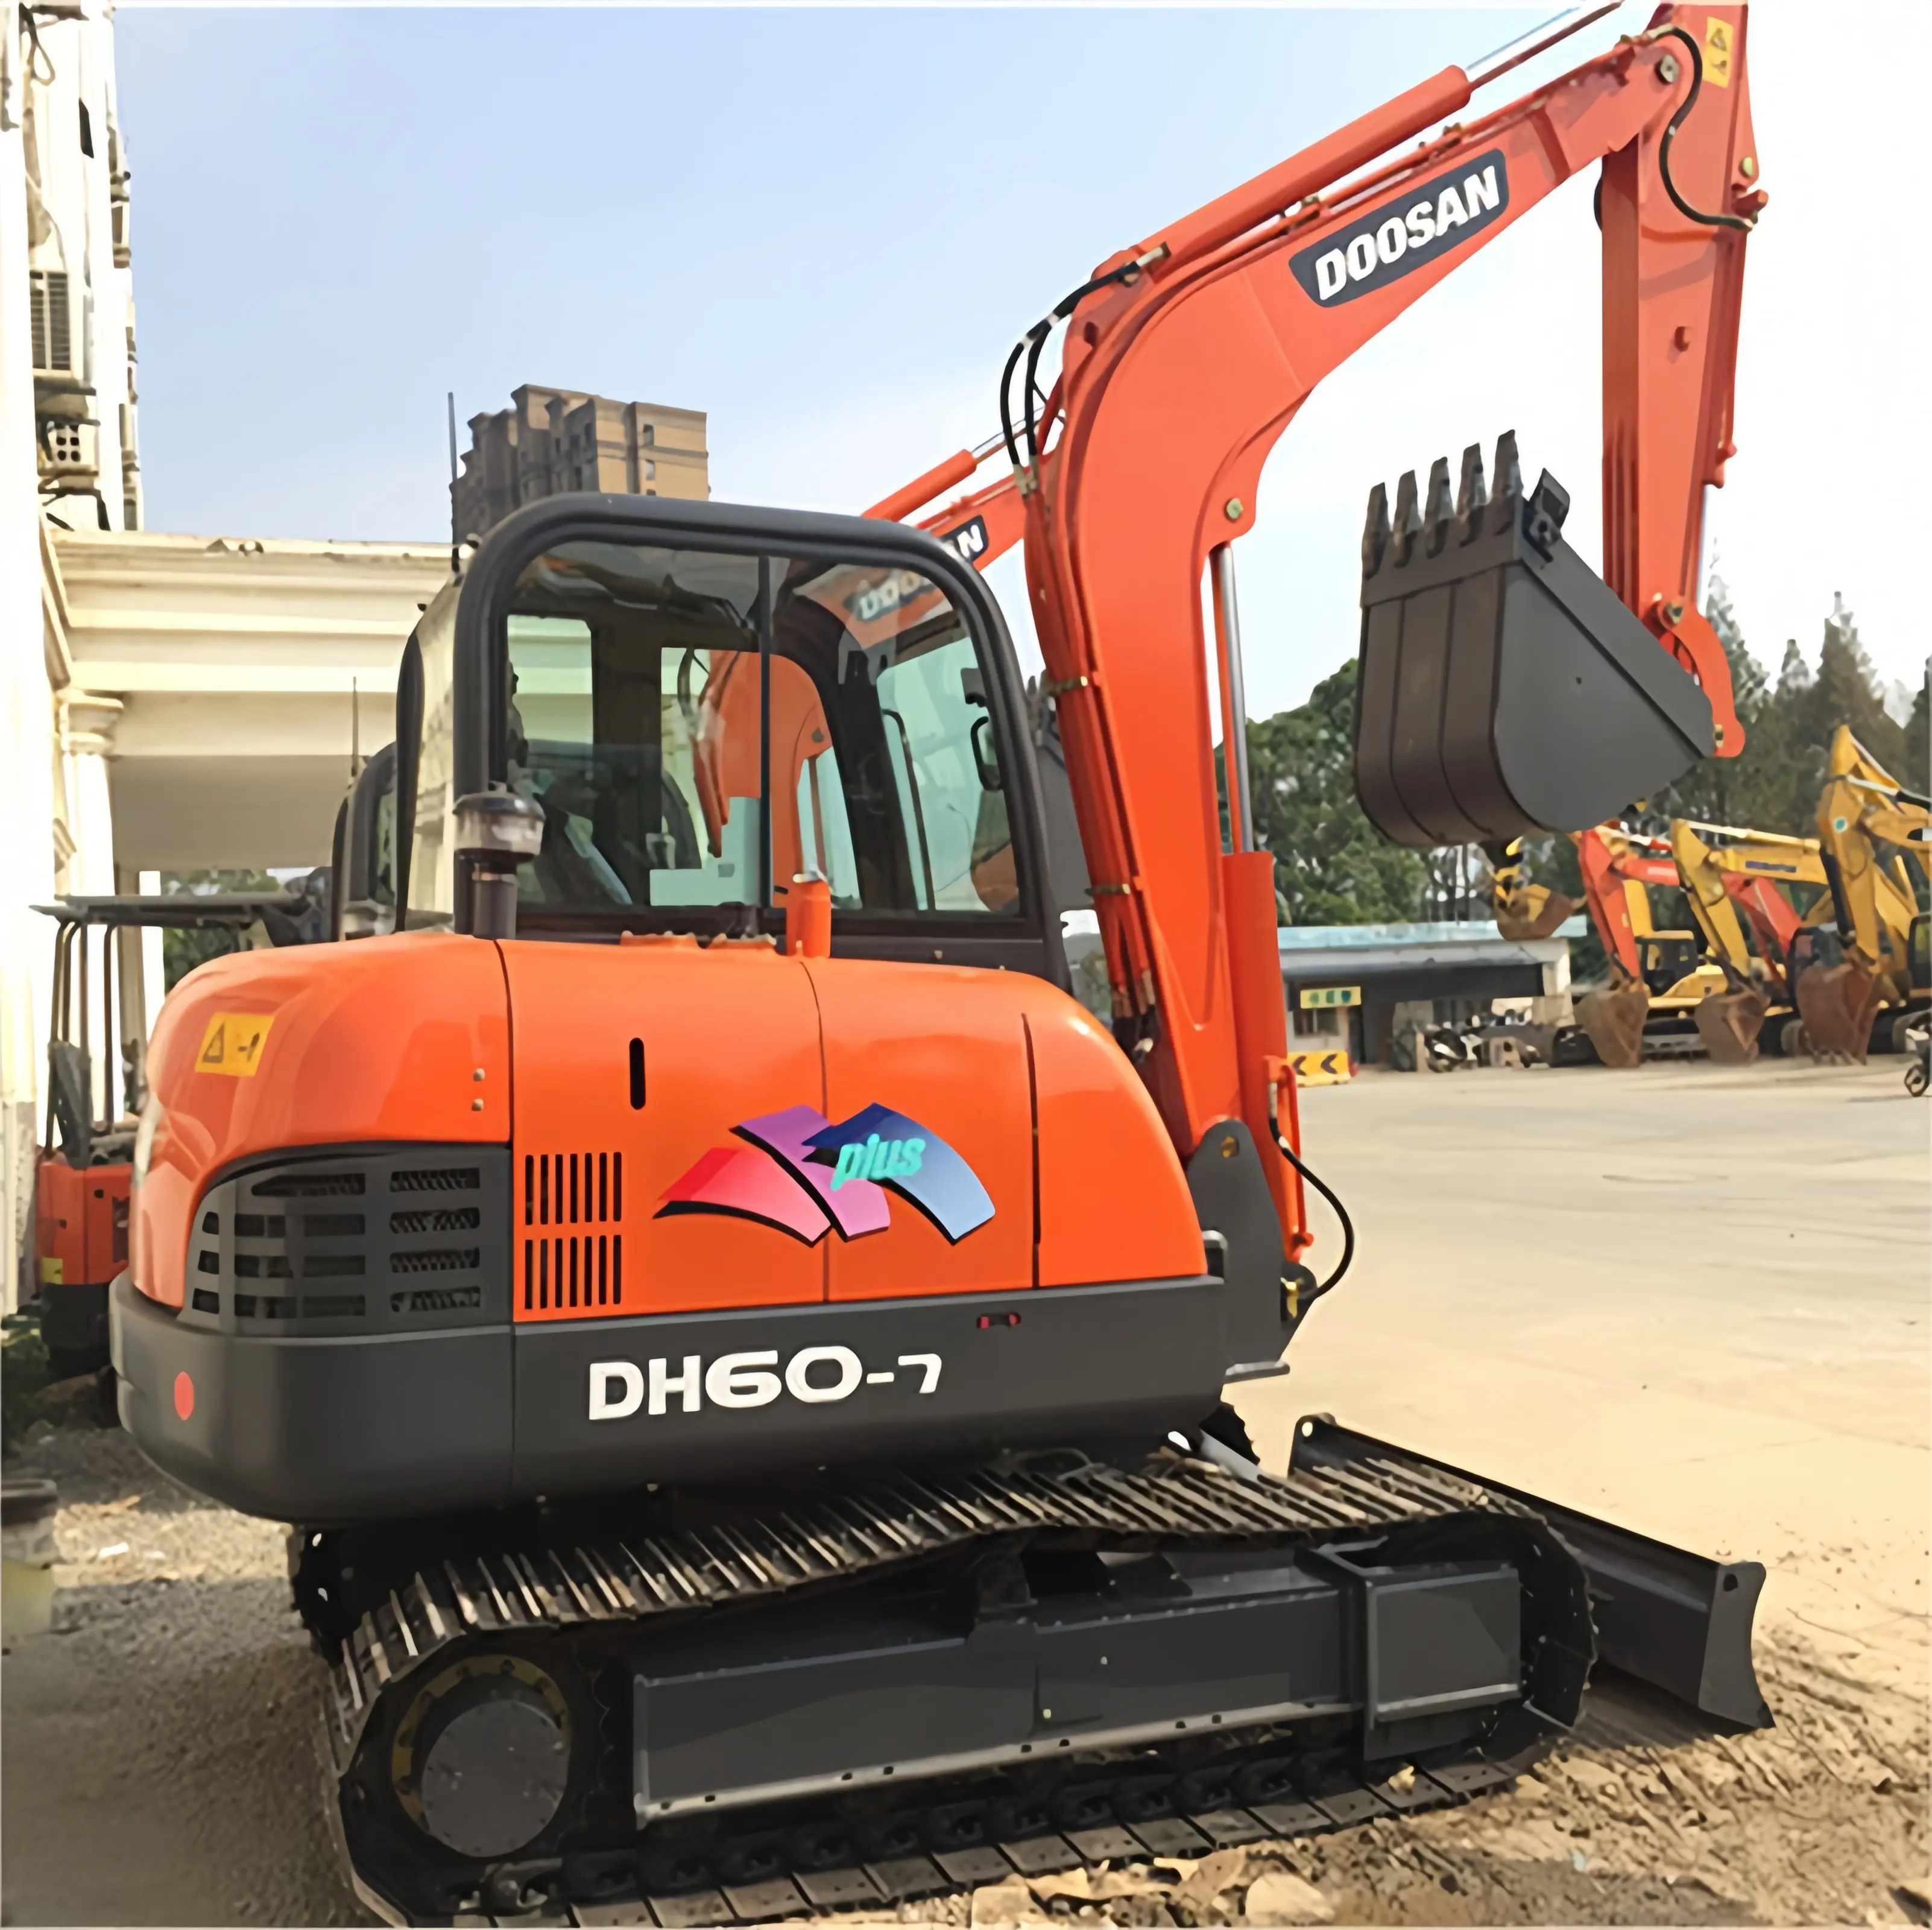 Real Supplier Direct Sale Used Doosan DH60-7 Second Hand Crawler Excavator Digger for Sale